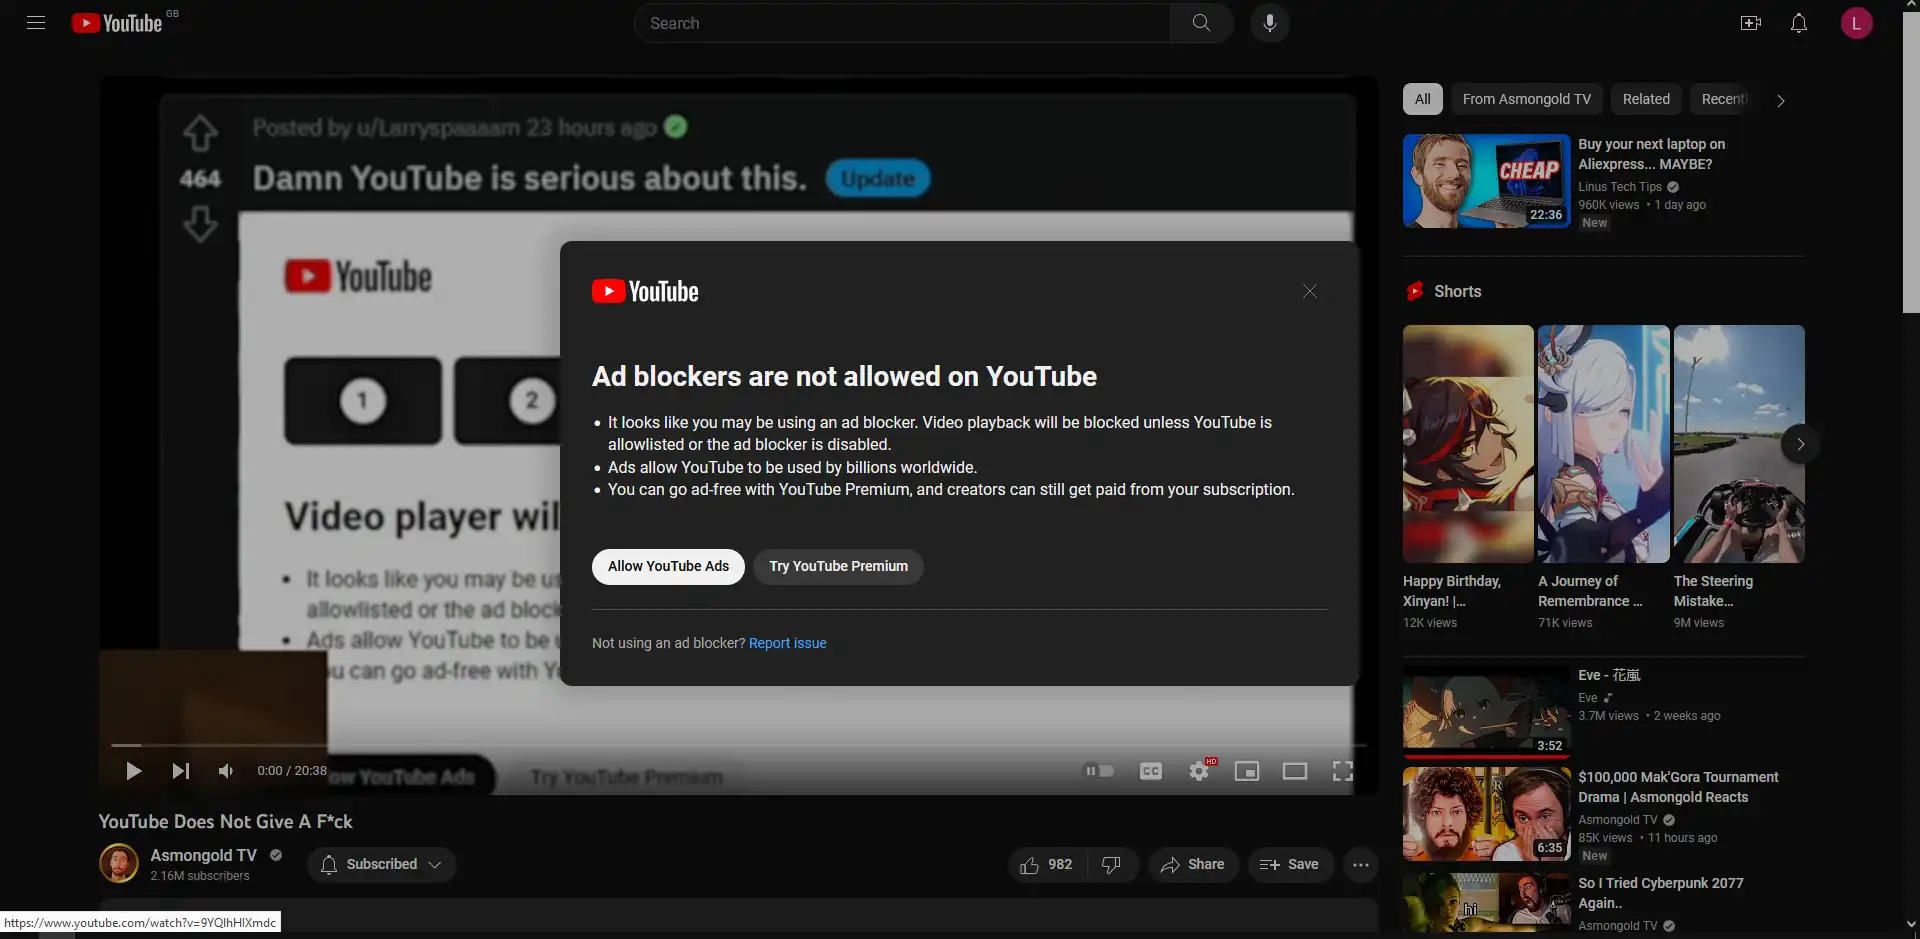 Annoying pop-up on YouTube. This is aggravating.